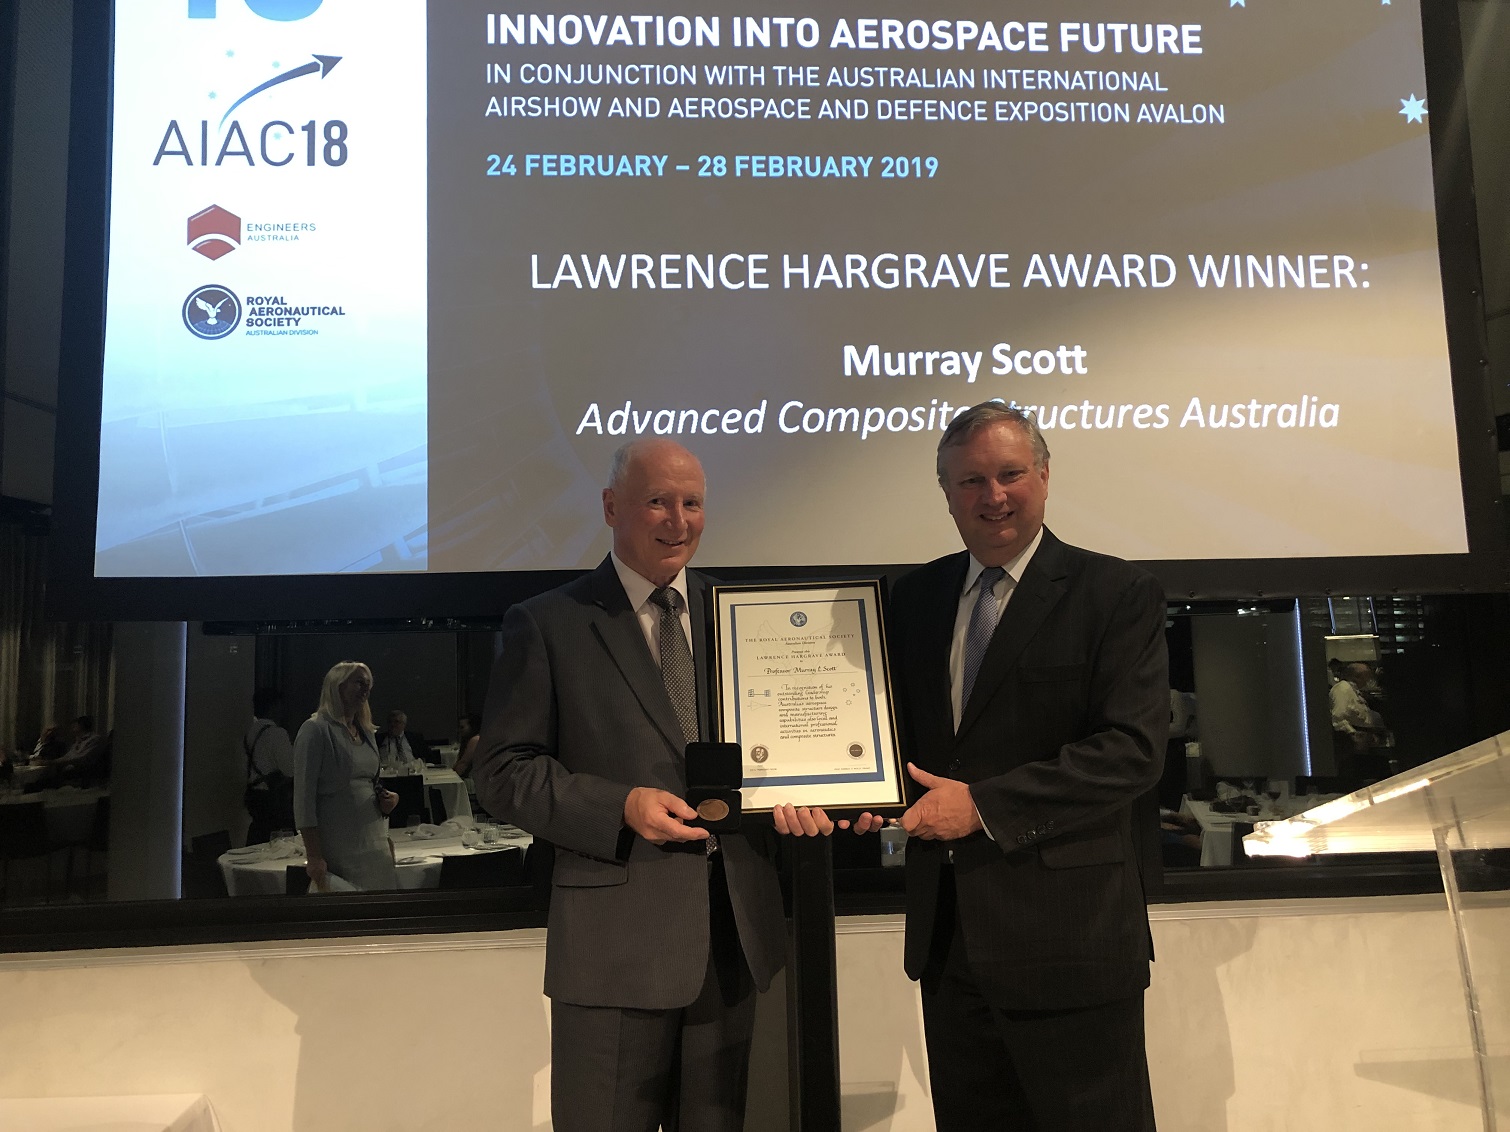 Professor Murray Scott stands with his award